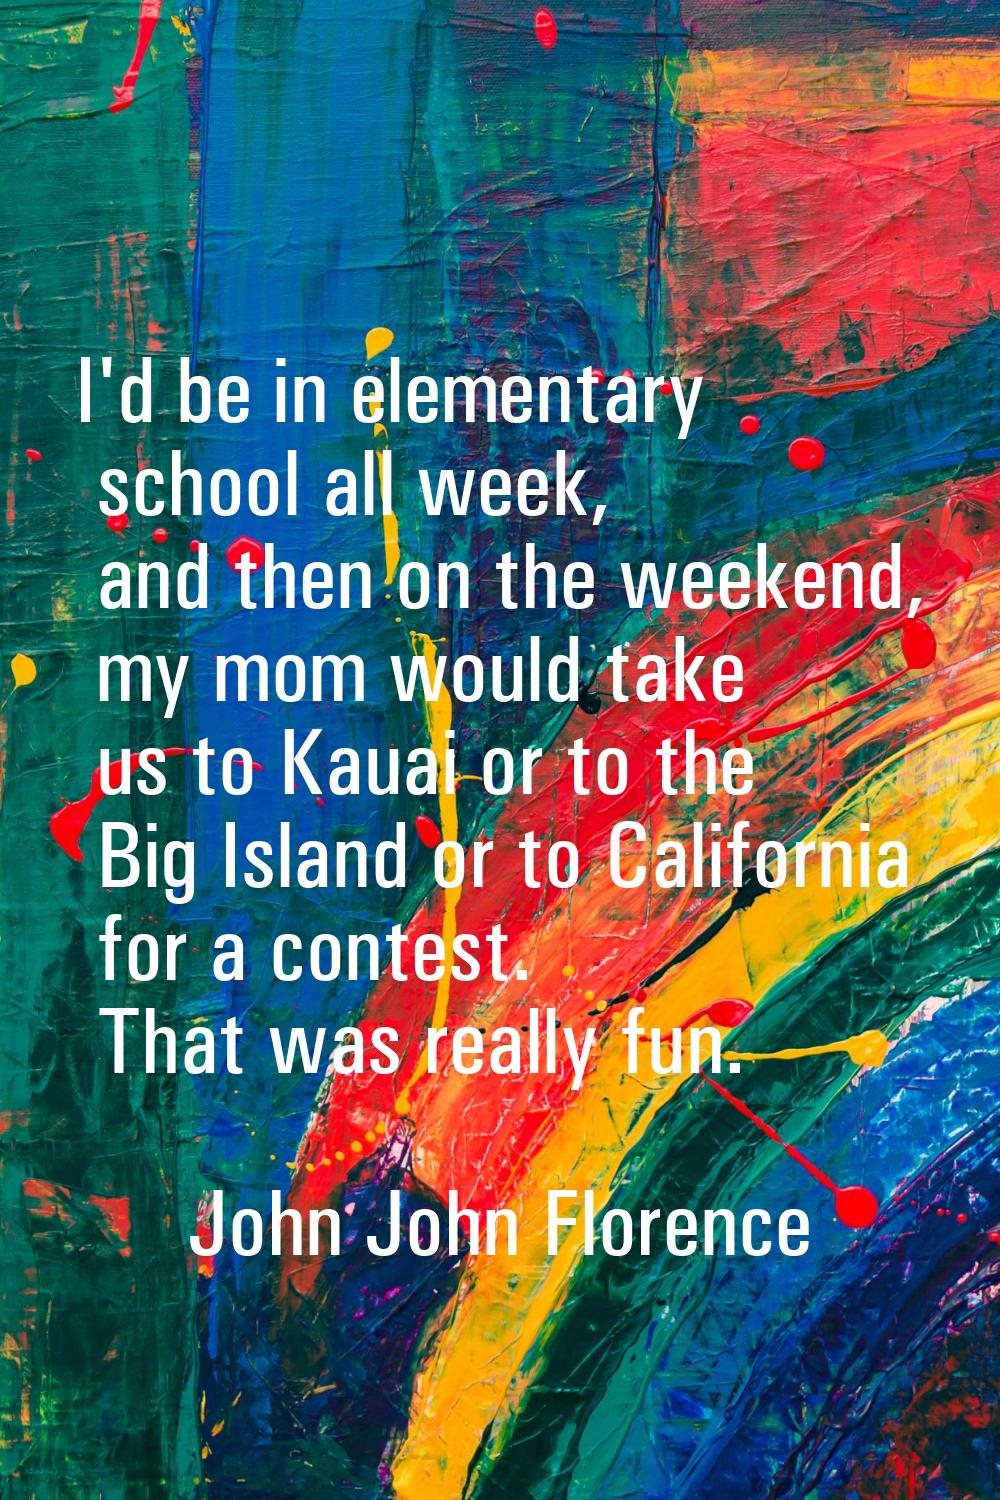 I'd be in elementary school all week, and then on the weekend, my mom would take us to Kauai or to 